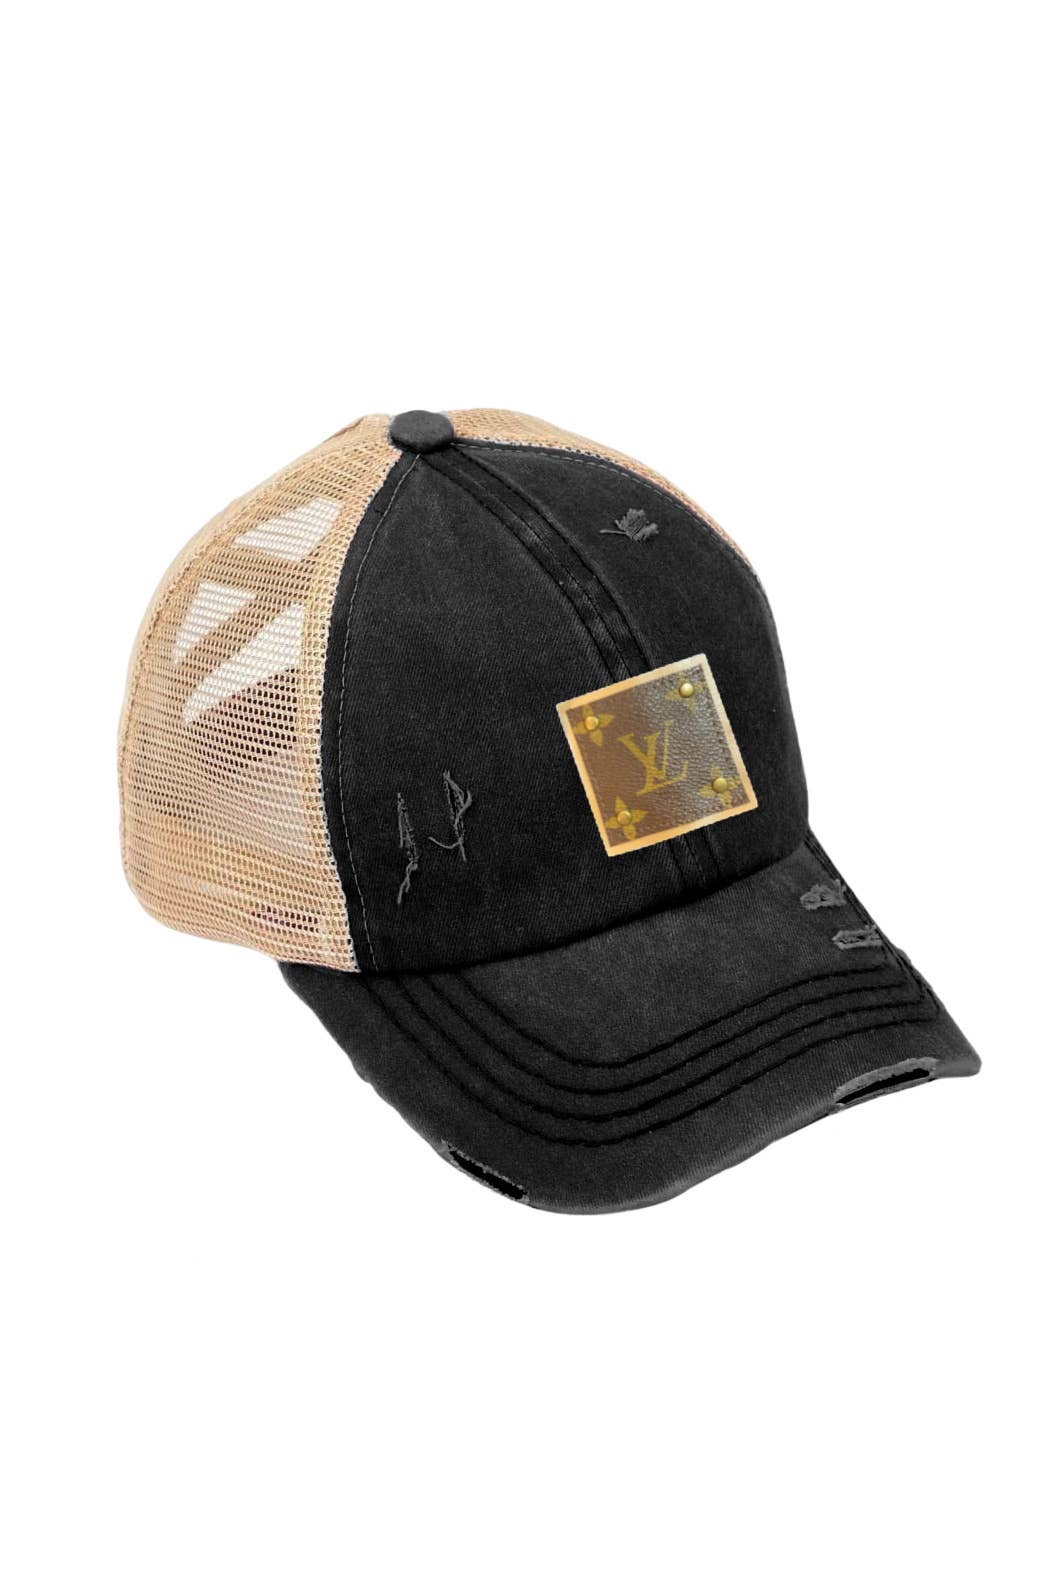 Embellish Your Life - LV Up-Cycled Distressed Trucker Cap